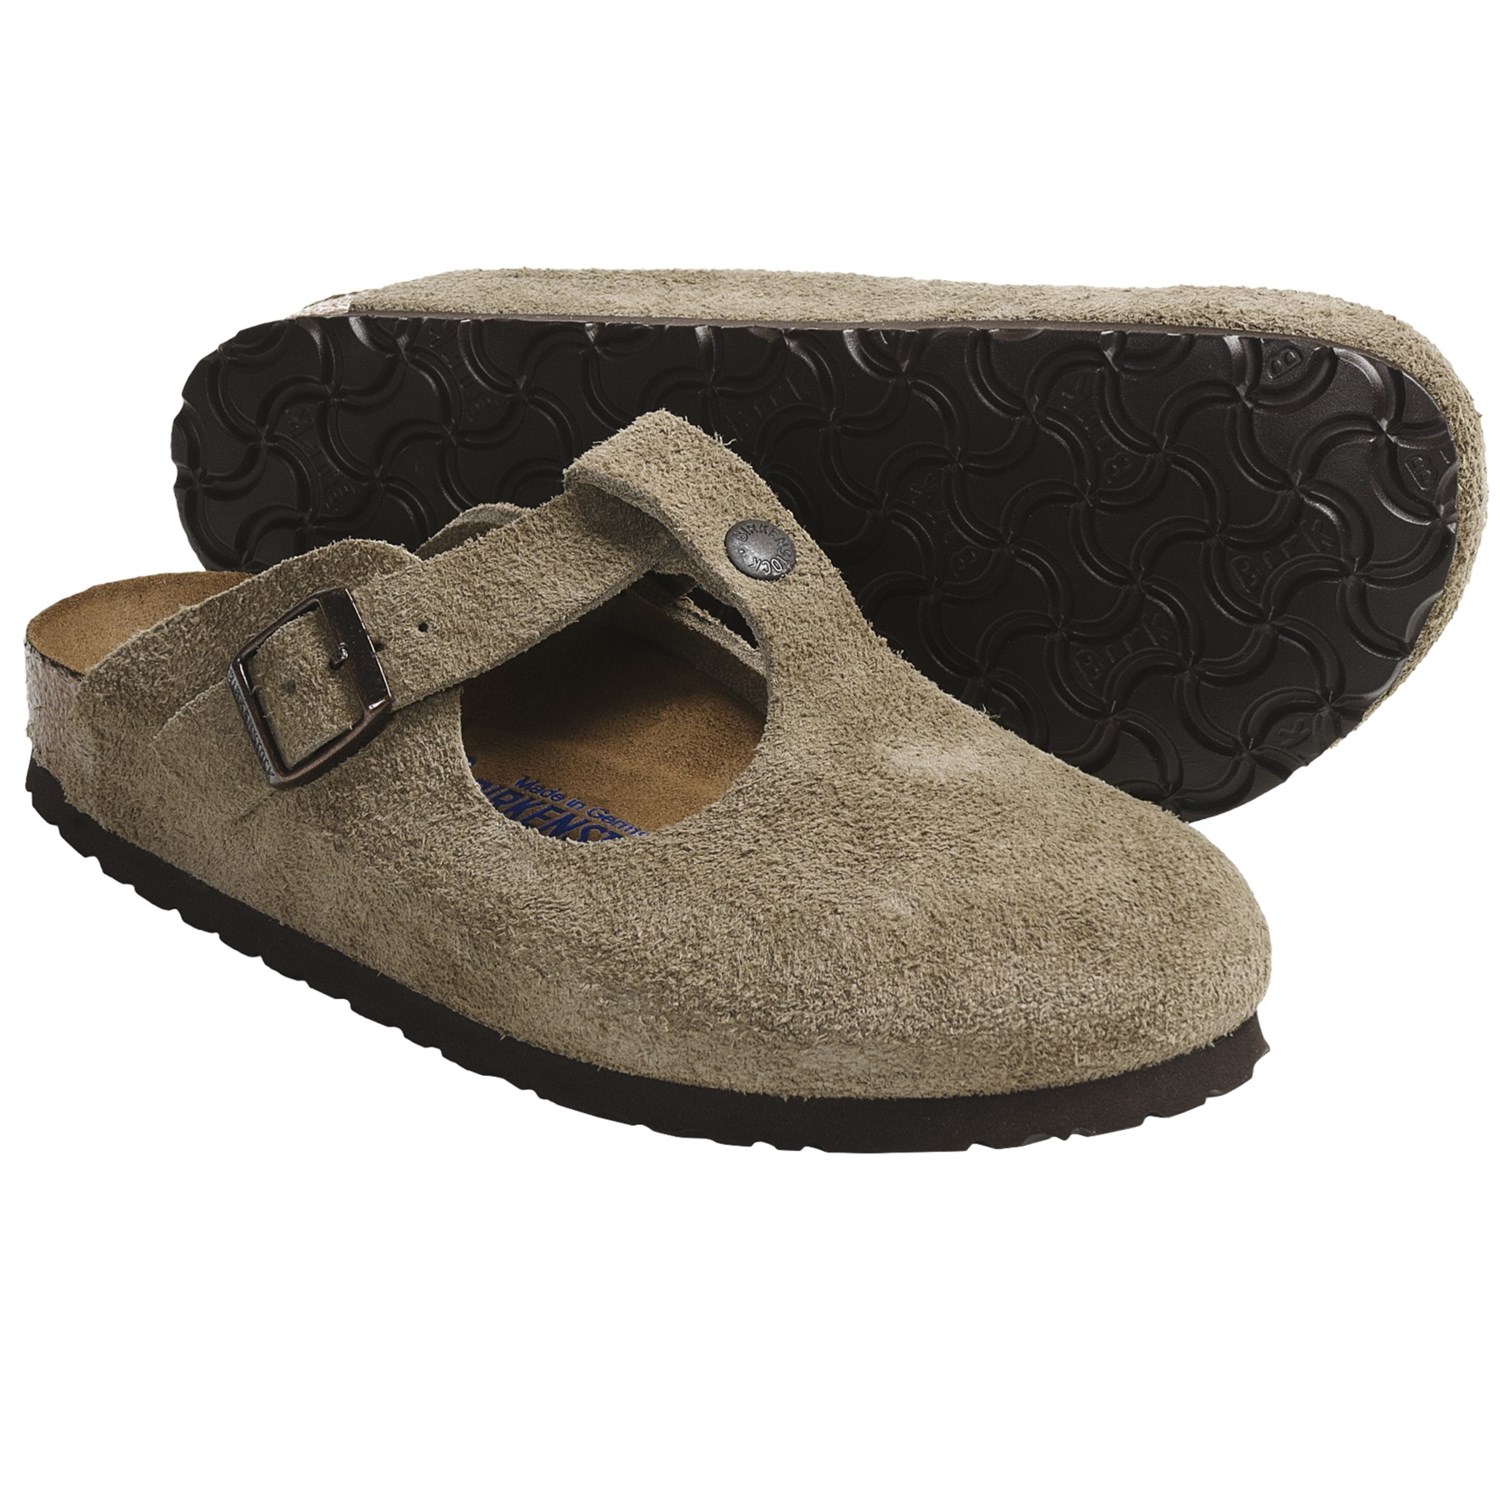 Birkenstock Bern Clogs - Suede Soft Footbed (For Women) in Taupe Suede